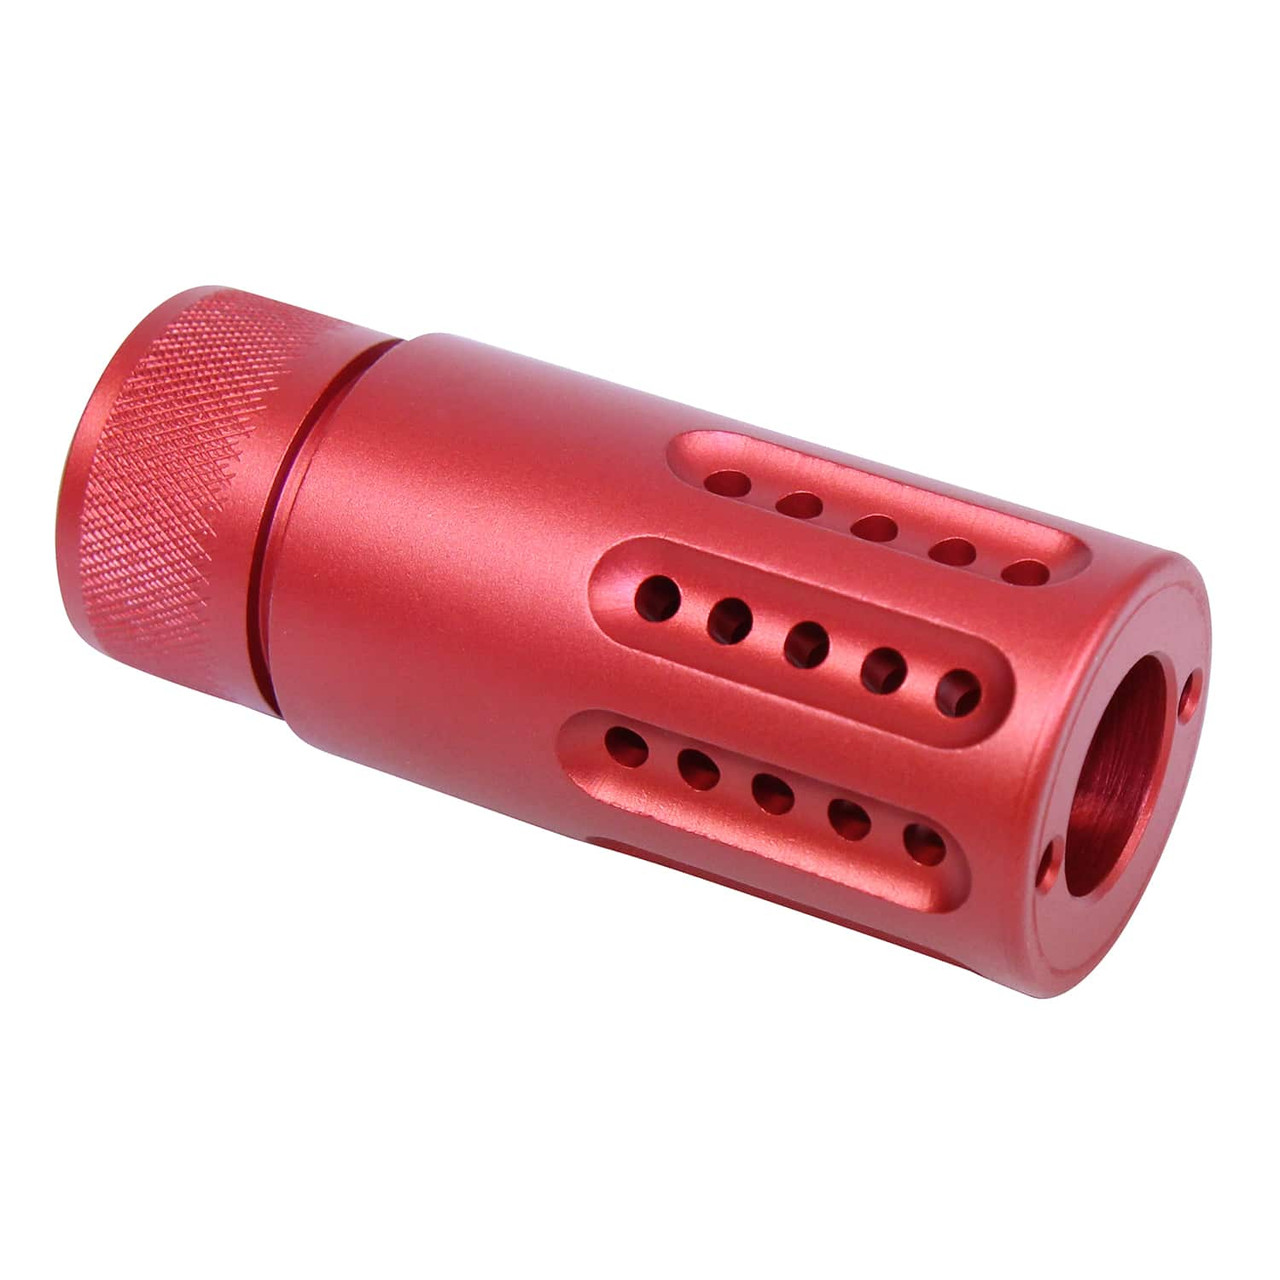 Guntec USA 1326-MB-P-S-308-RED Micro Slip Over Barrel Shroud With Multi Port Muzzle Brake (.308 Cal) (Anodized Red)